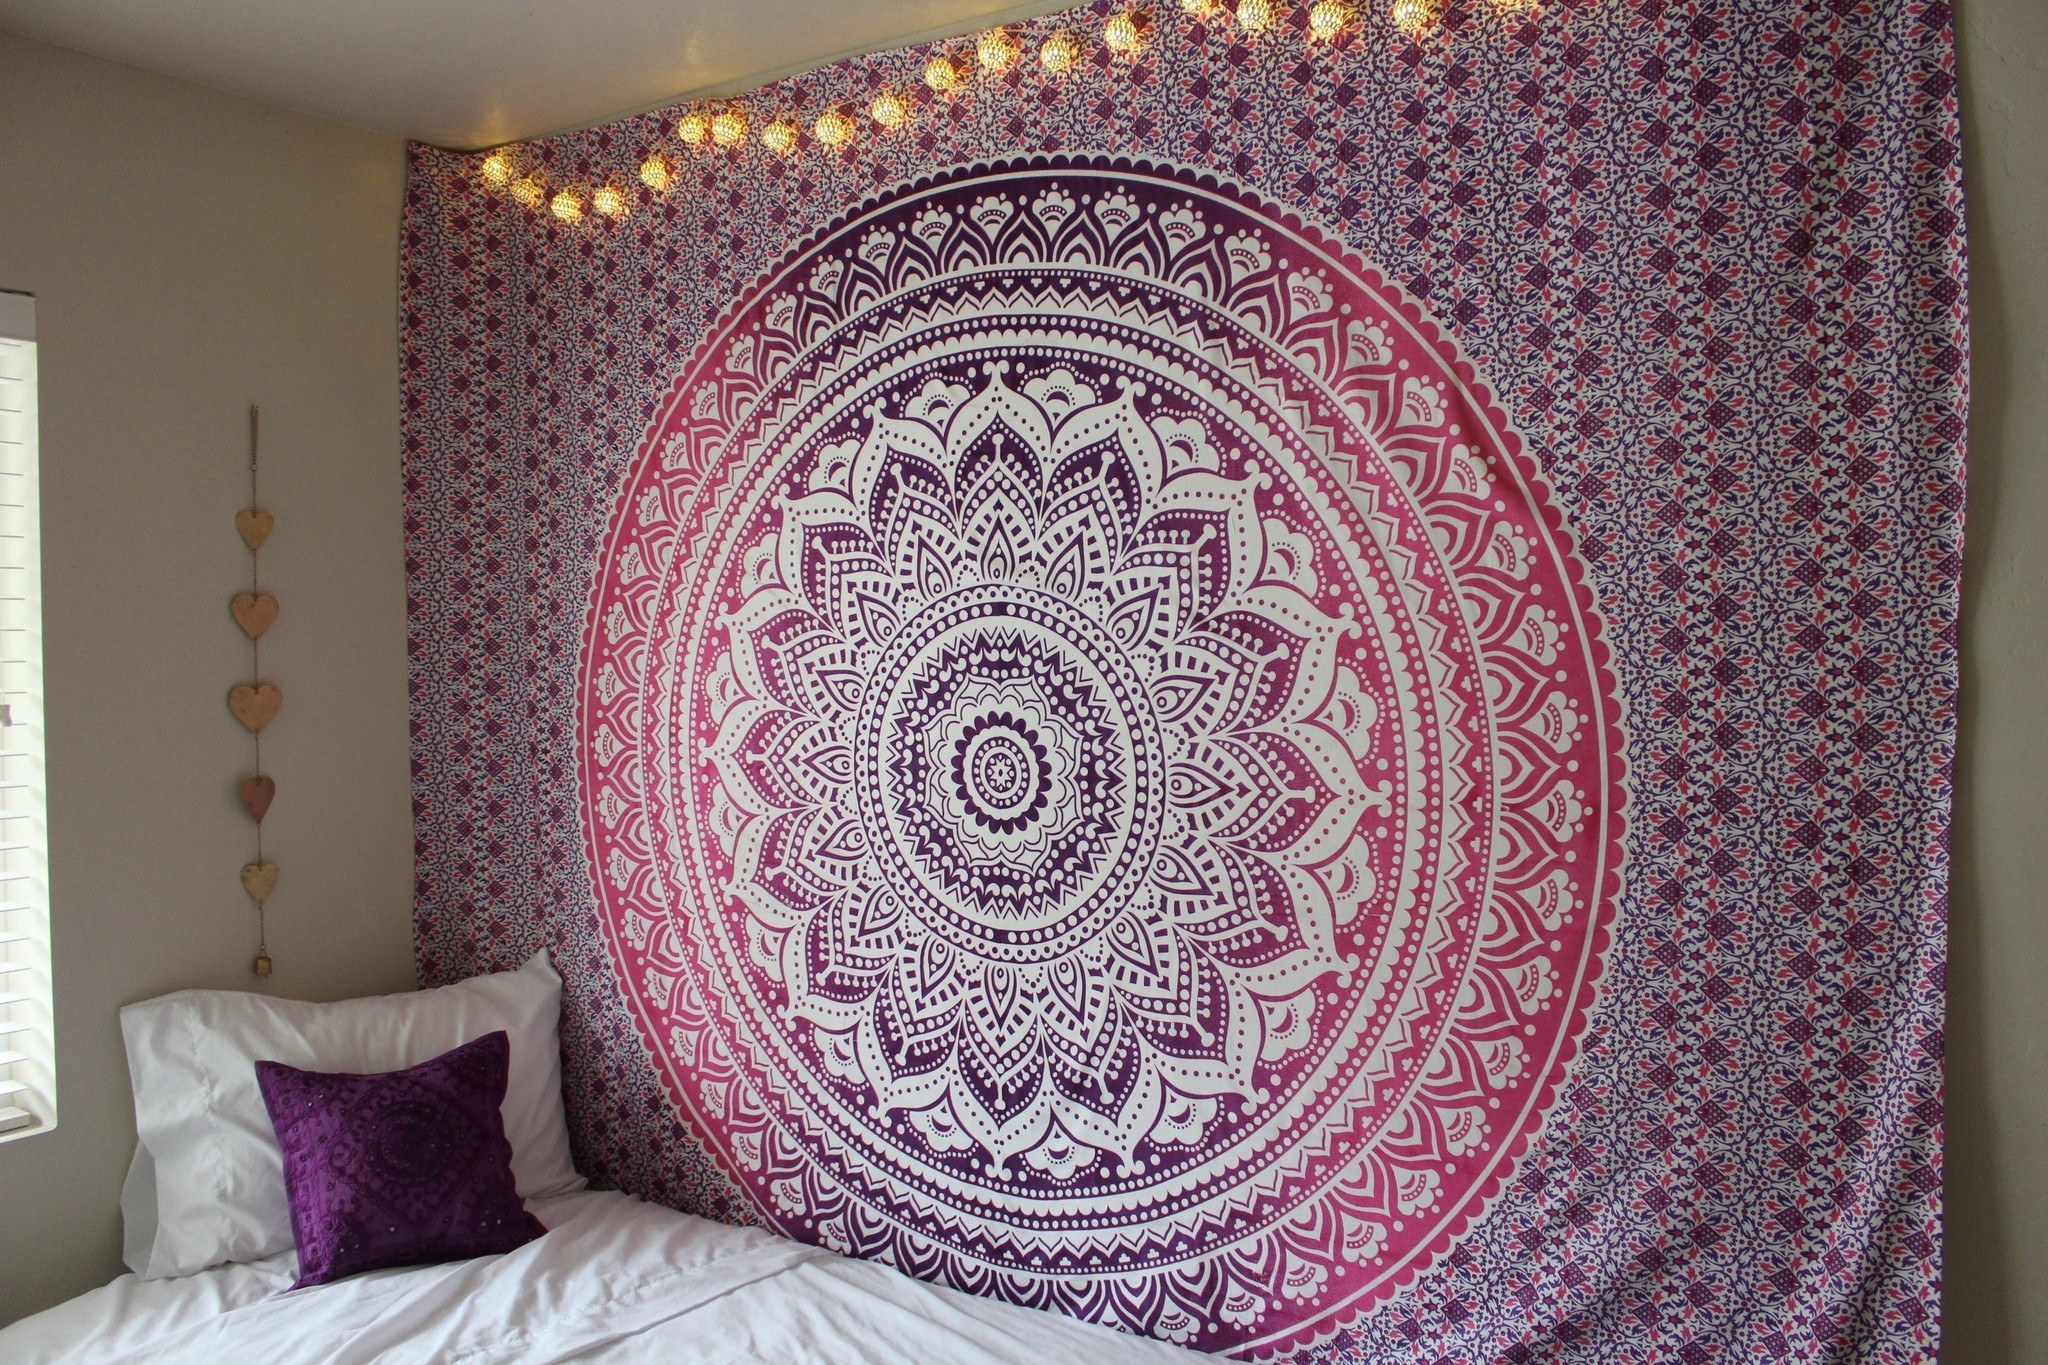 King/Queen Mandala Tapestry Indian Wall Hanging Bohemian Hippie Bedspread Throw